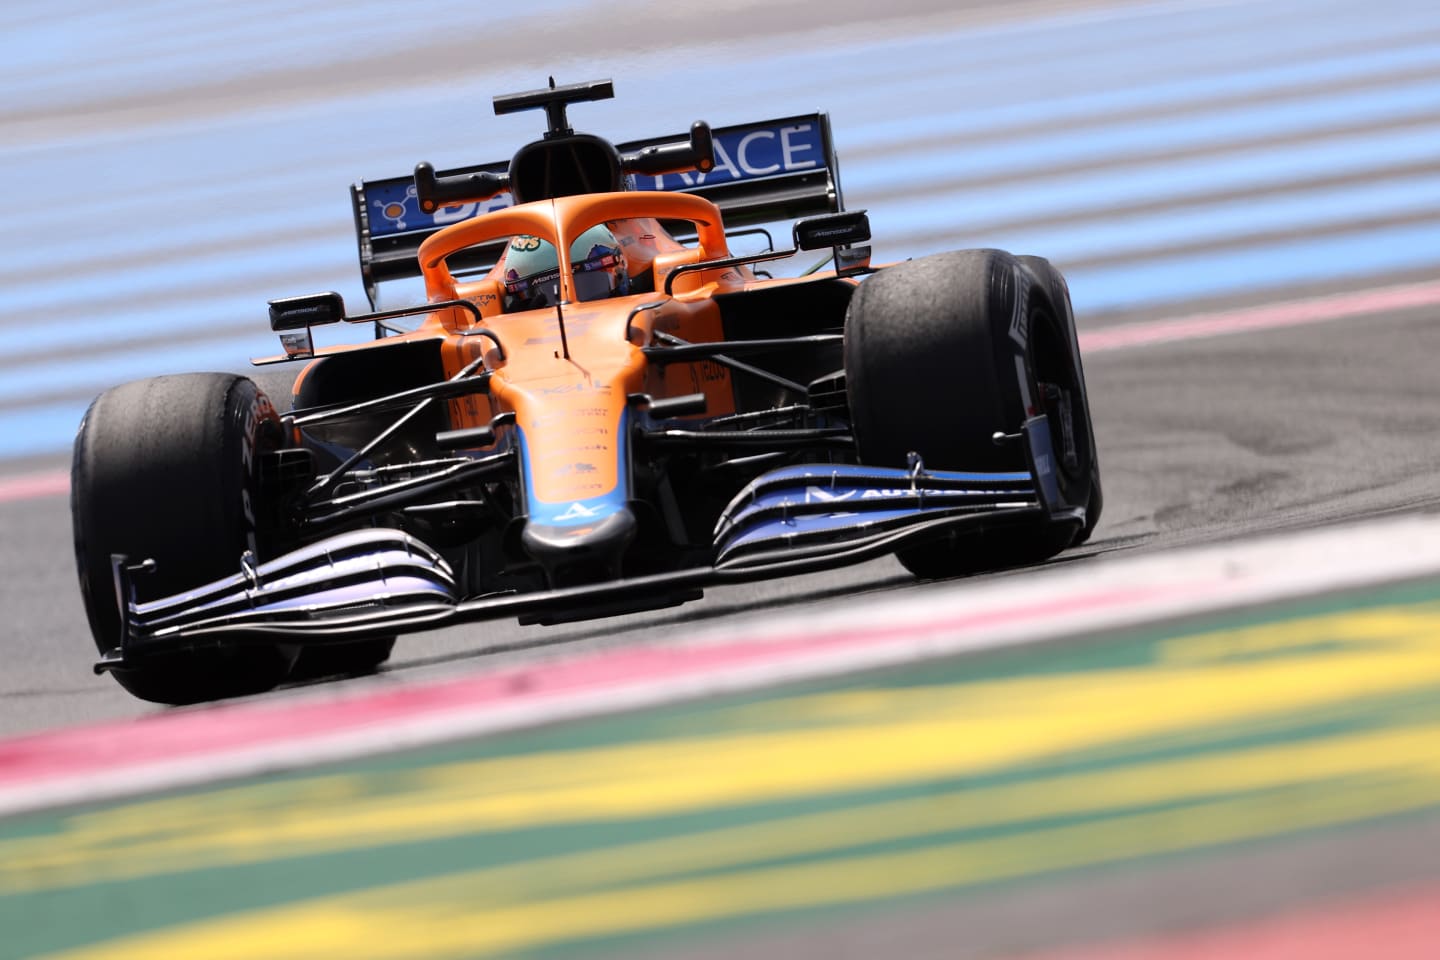 LE CASTELLET, FRANCE - JUNE 18: Daniel Ricciardo of Australia driving the (3) McLaren F1 Team MCL35M Mercedes on track during practice ahead of the F1 Grand Prix of France at Circuit Paul Ricard on June 18, 2021 in Le Castellet, France. (Photo by Clive Rose/Getty Images)